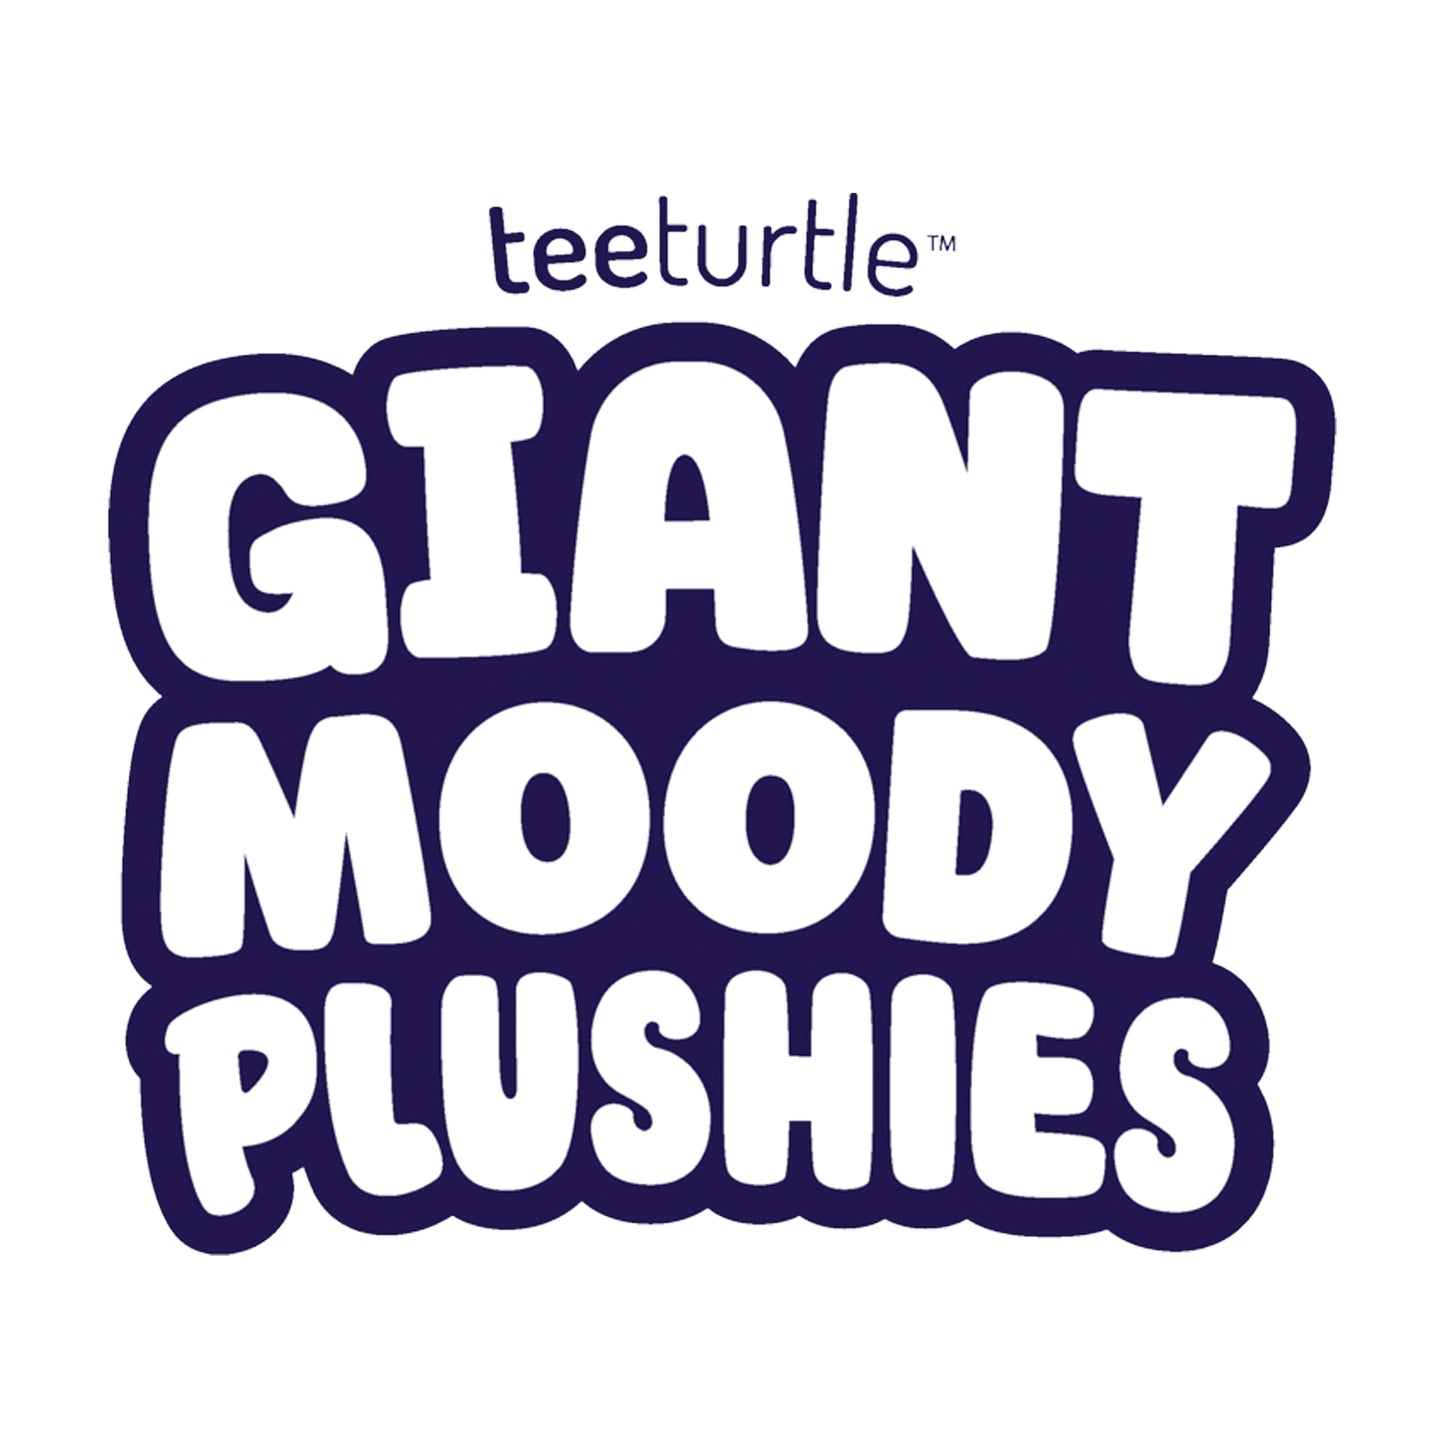 TeeTurtle offers TeeTurtle Giant Moody Octopus Plushies perfect for cuddling. These non-reversible plushies are a must-have!